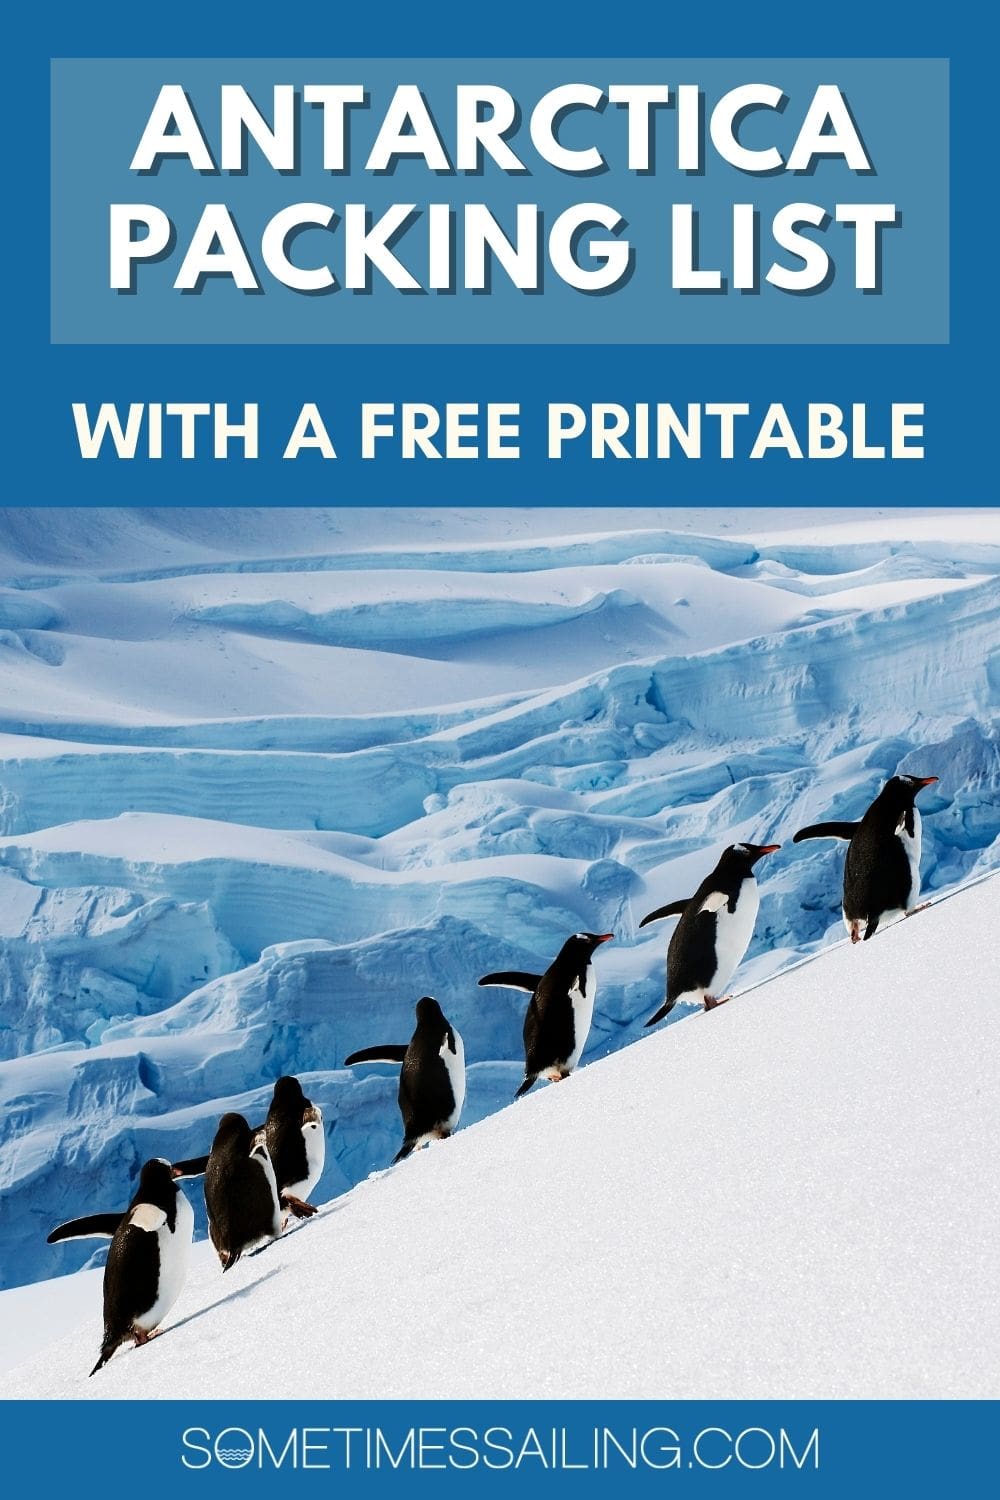 Clothing for Antarctica, with a packing list and free printable and image of penguins going up a hill.